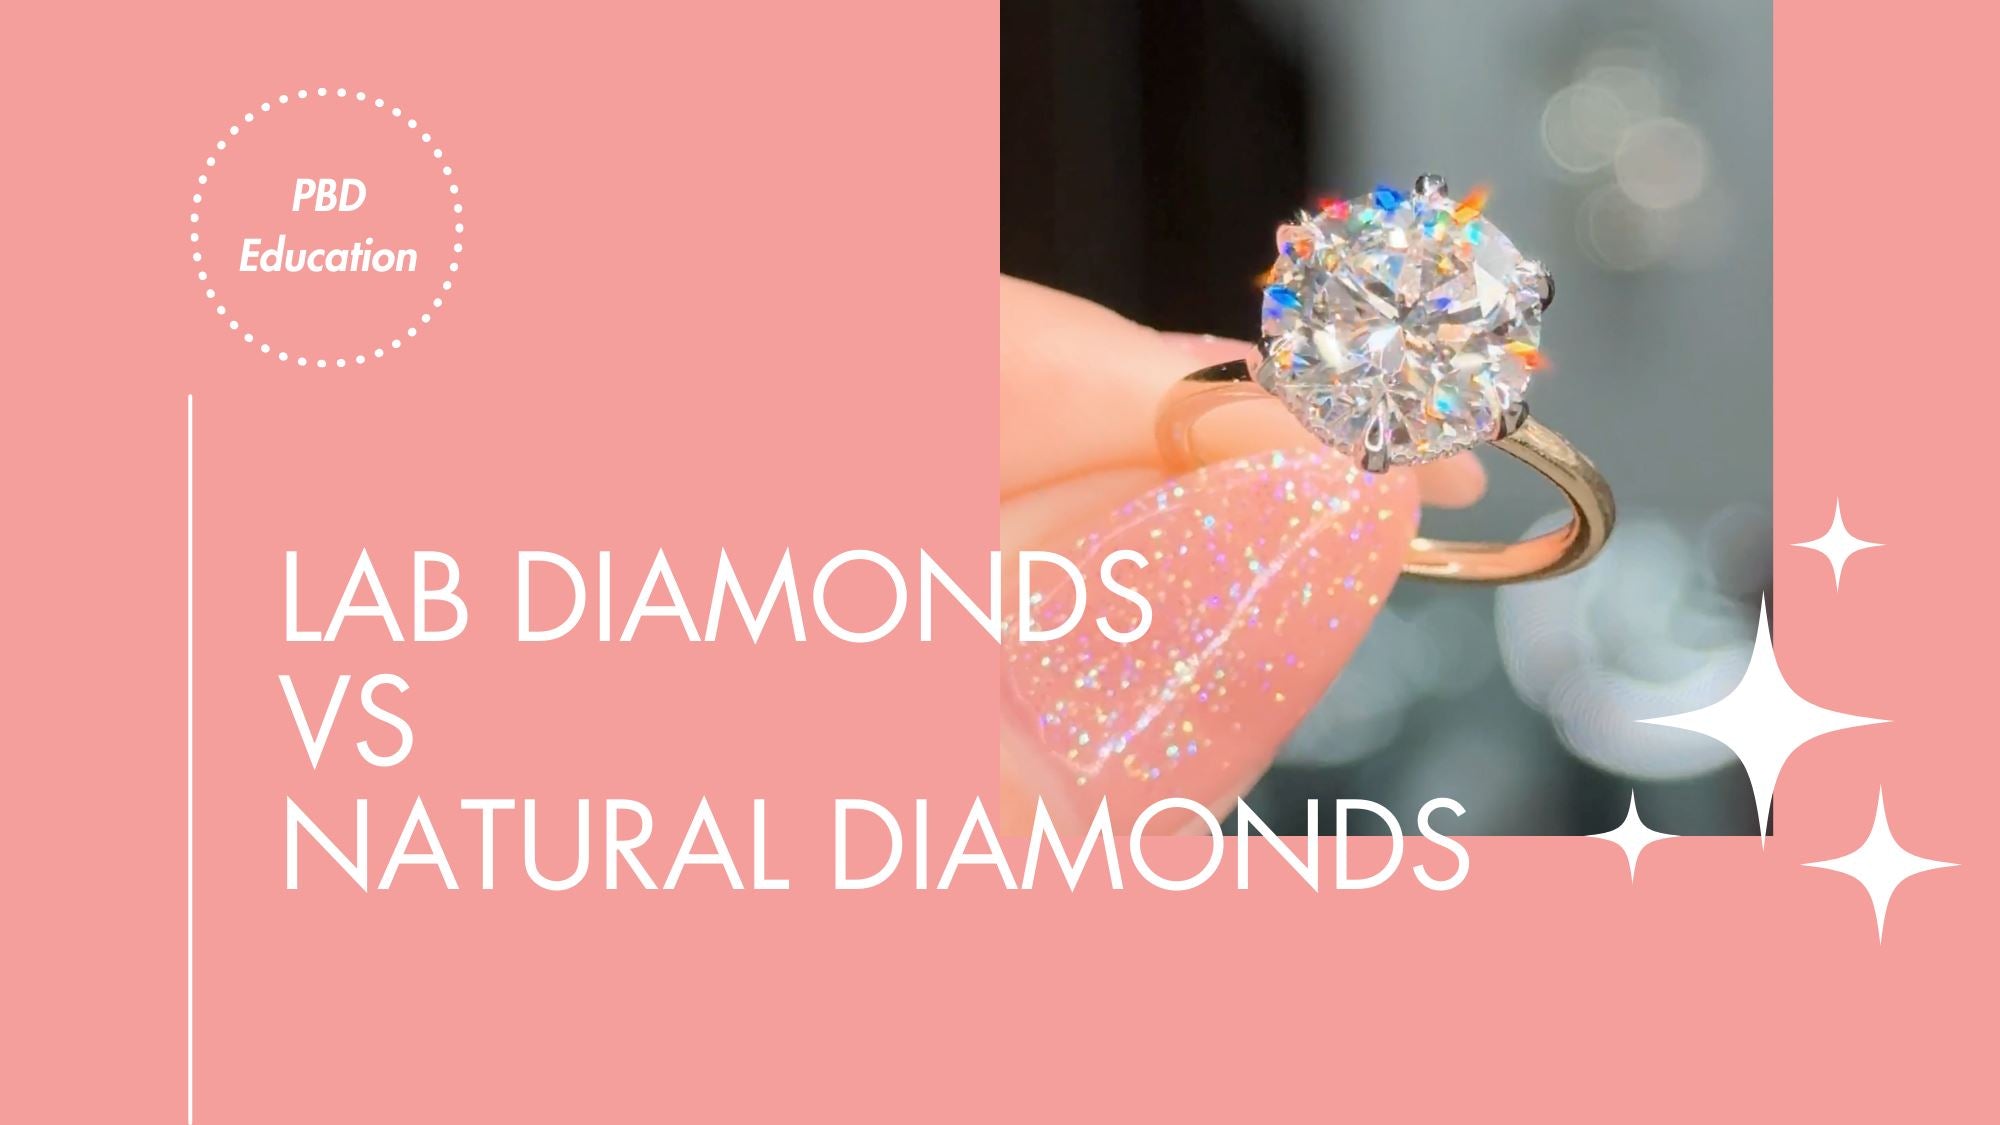 What is the difference between natural and lab diamonds?